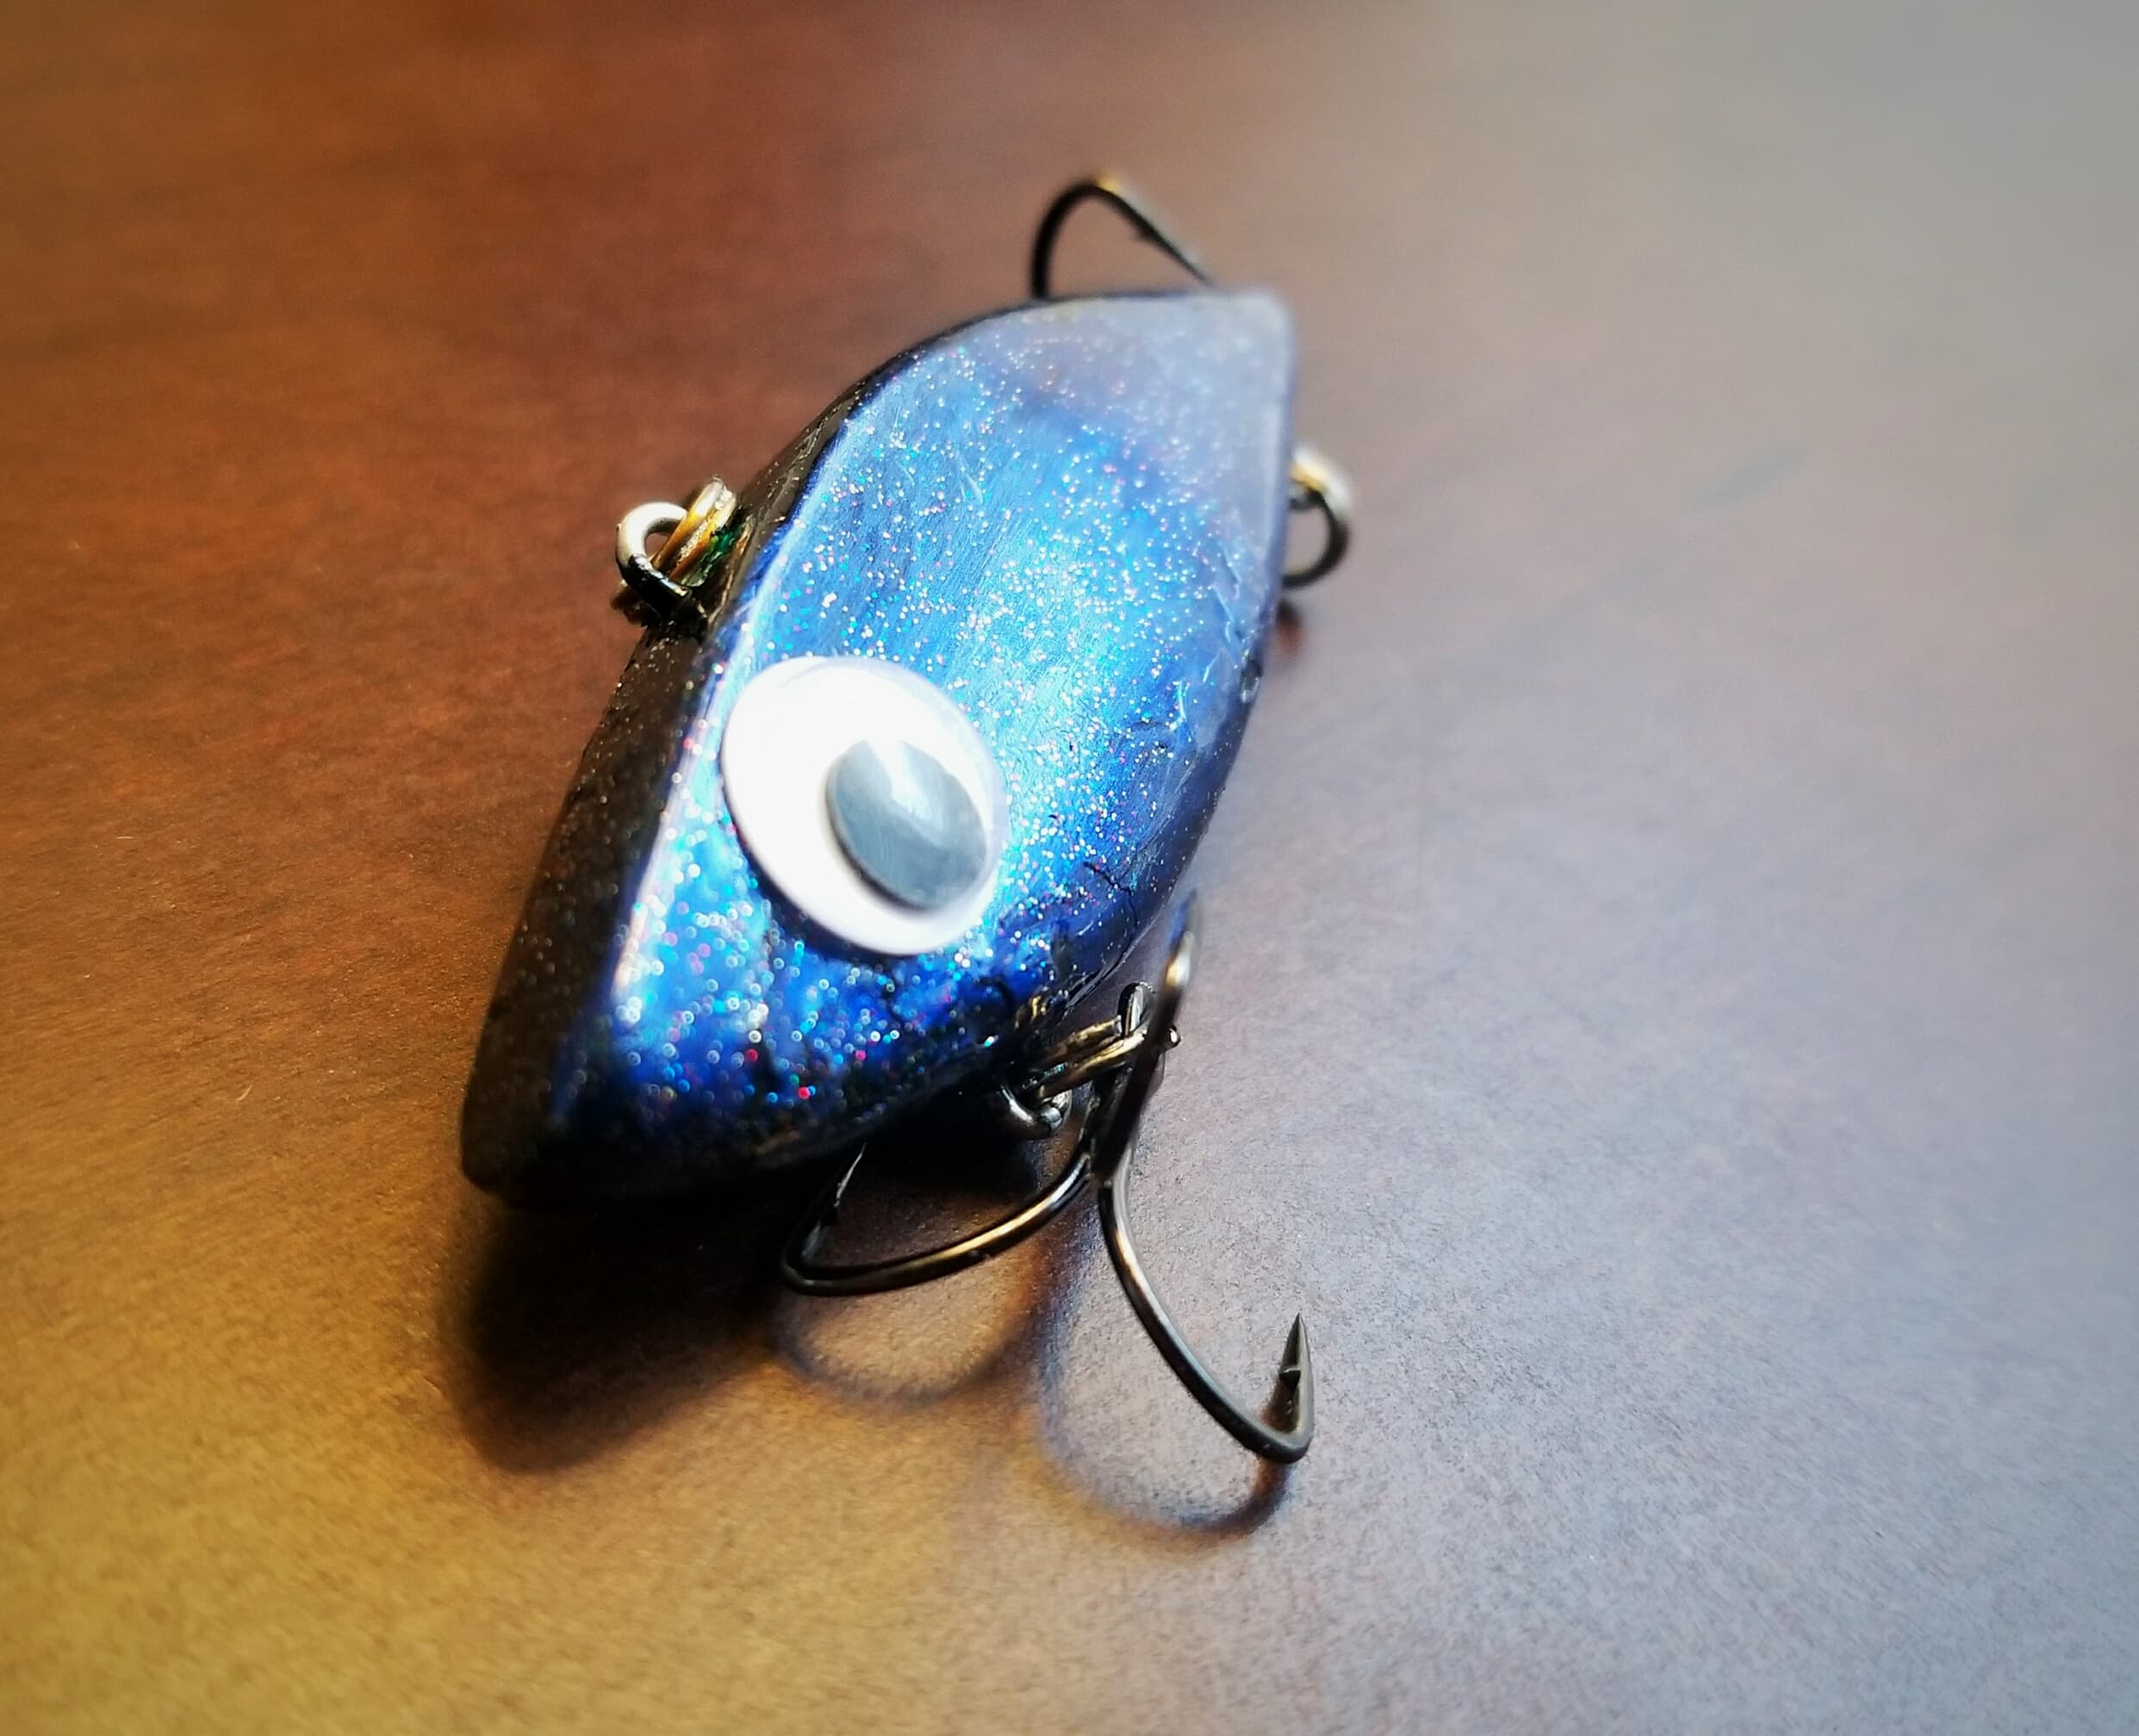 Black and blue painted Rattle Trap lure with glitter clear coat and googly eyes